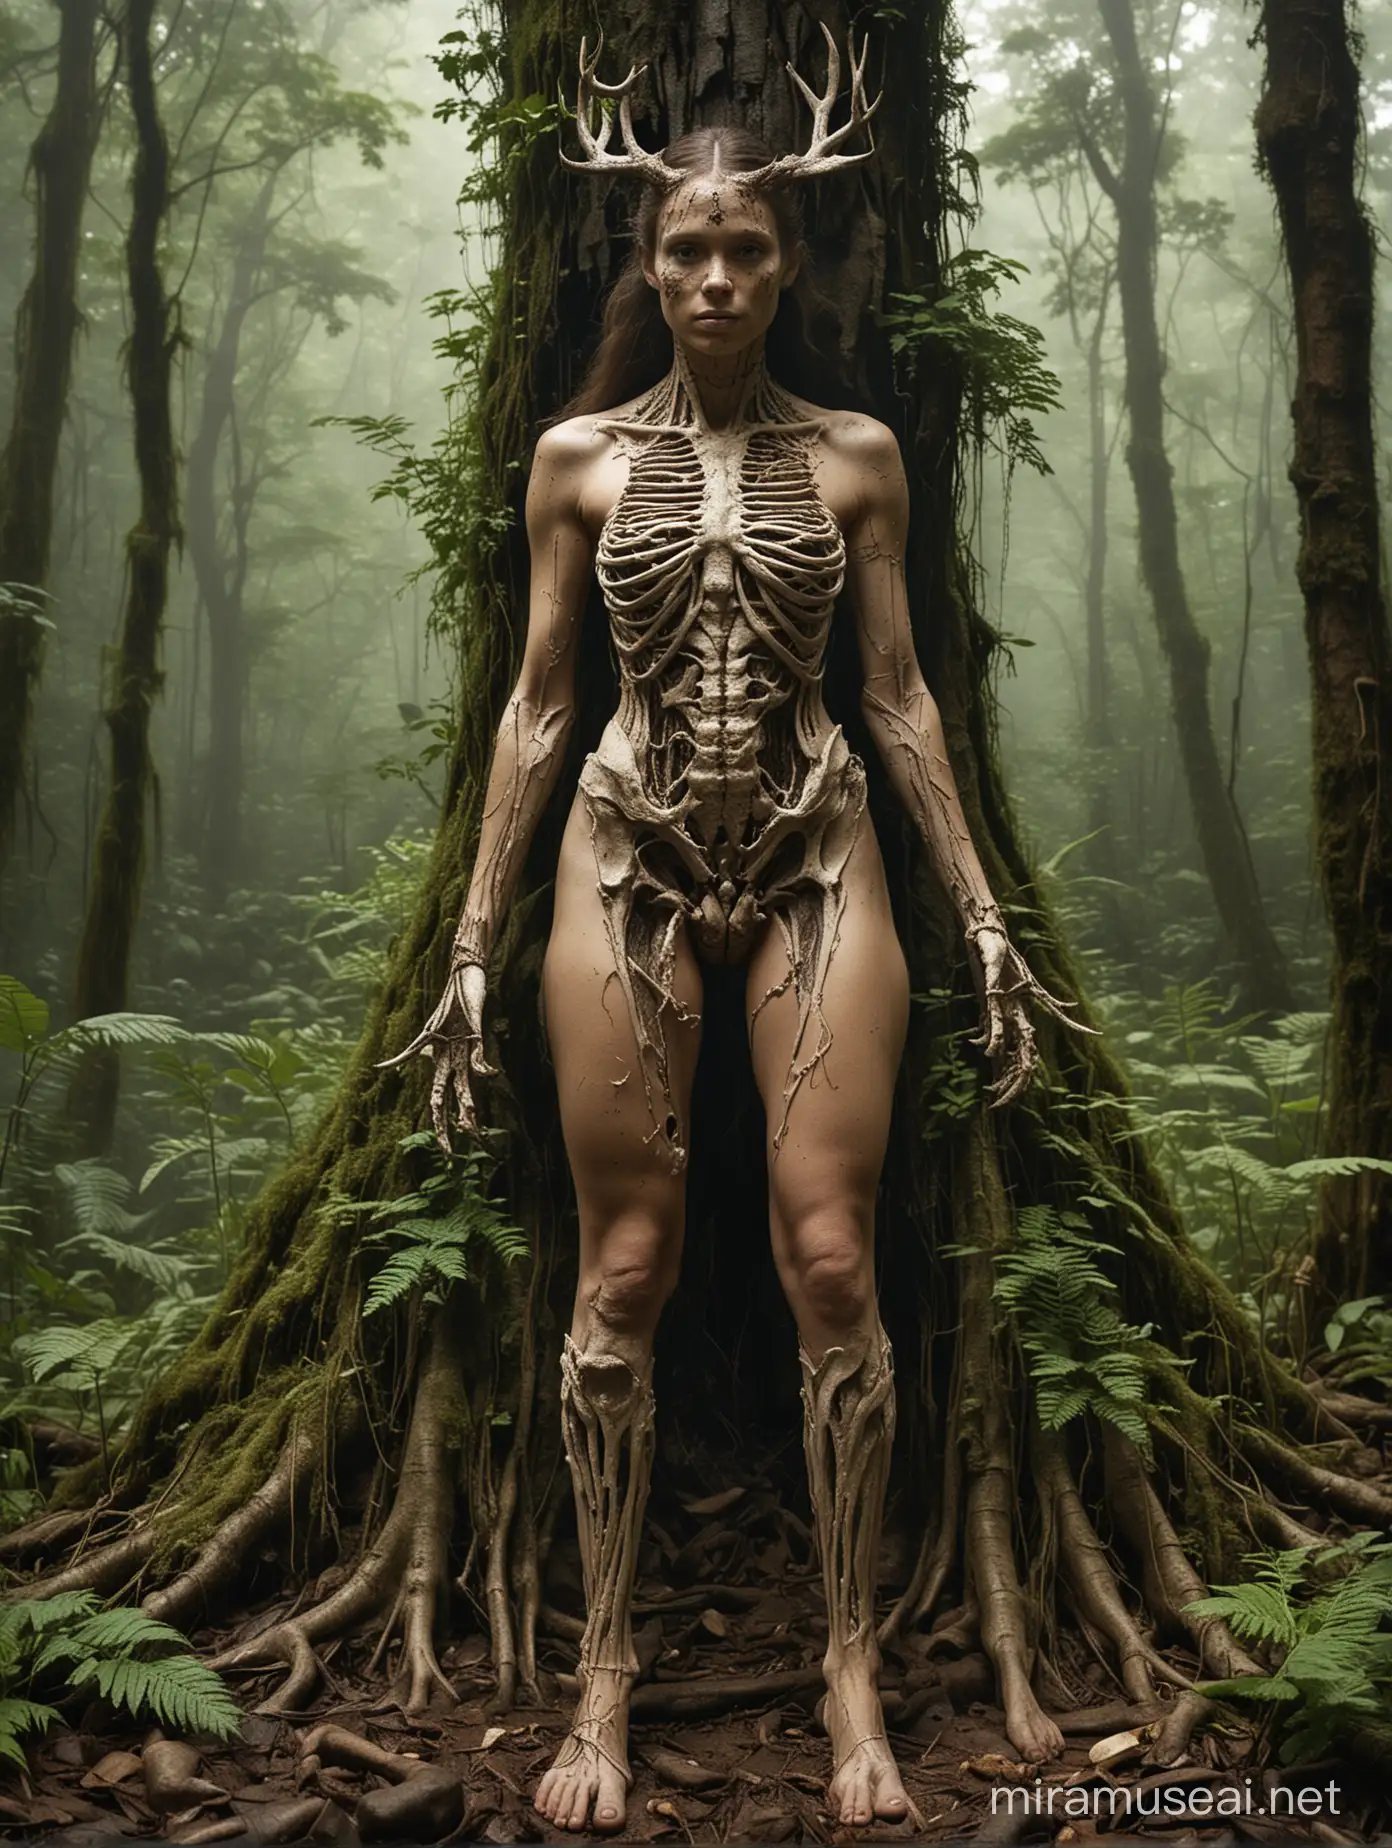 Enigmatic Woman with Deer Fossil Head and Tree Root Limbs in Rainforest